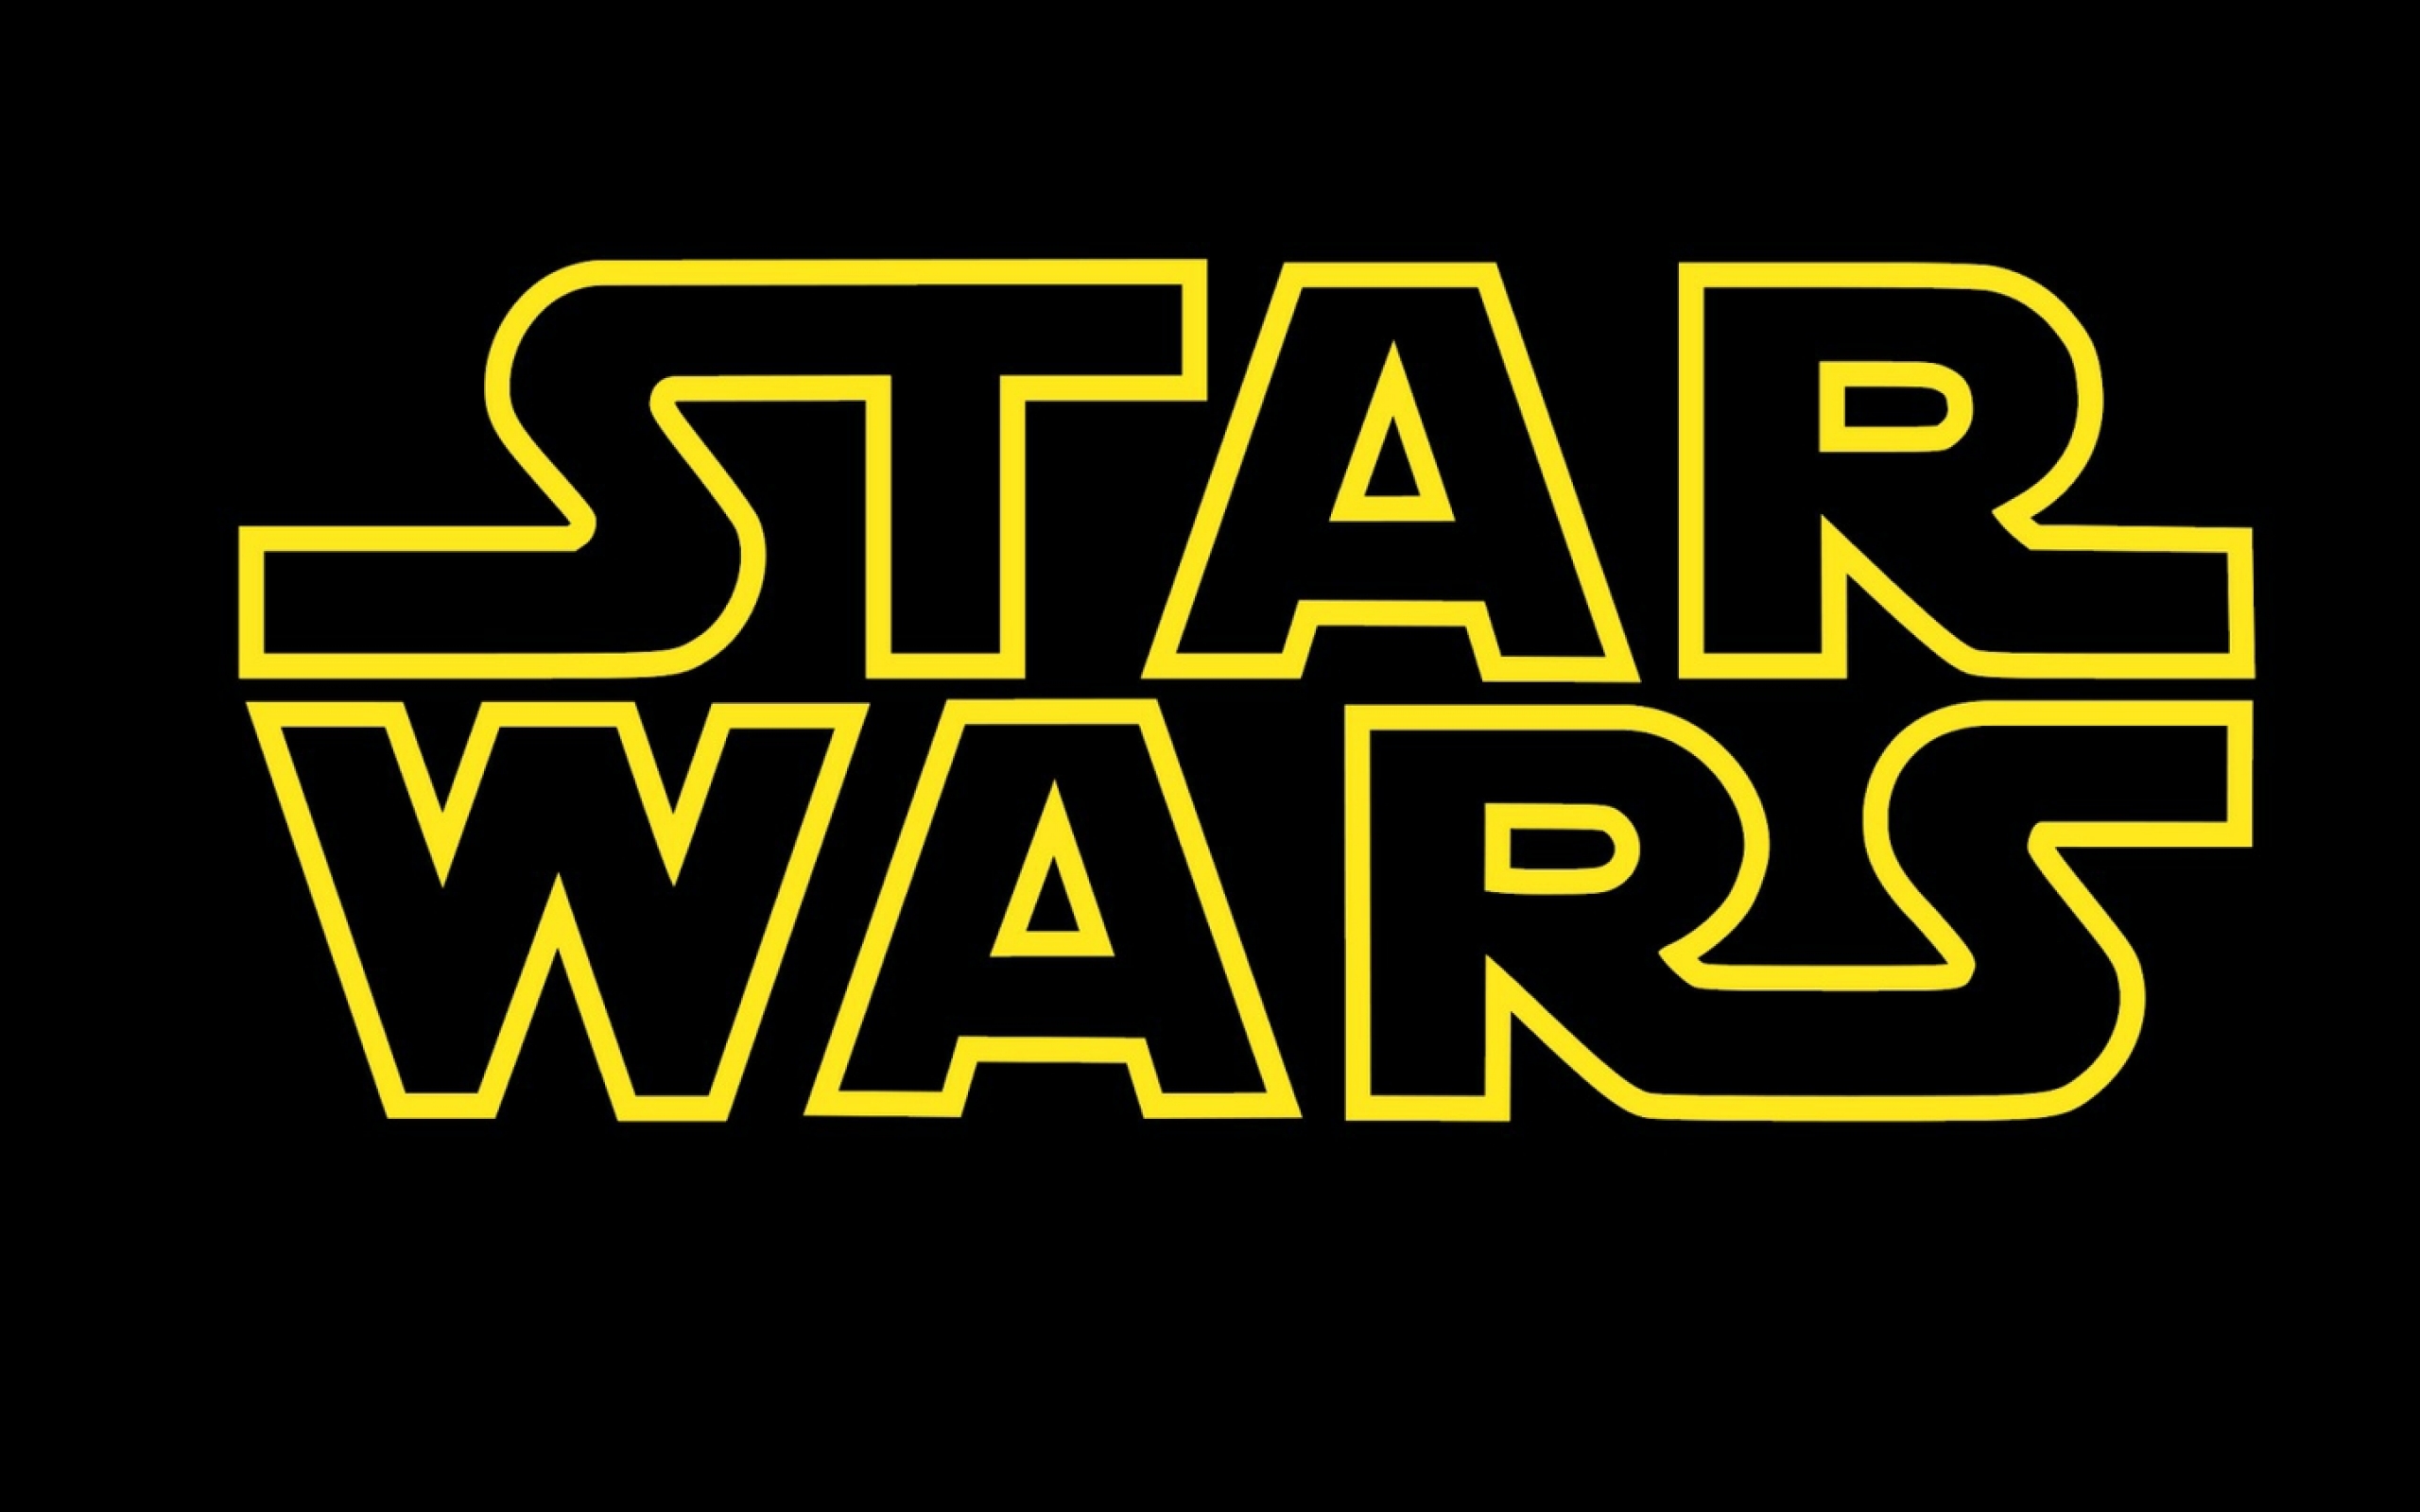 Awesome The Star Wars Logo Wallpaper